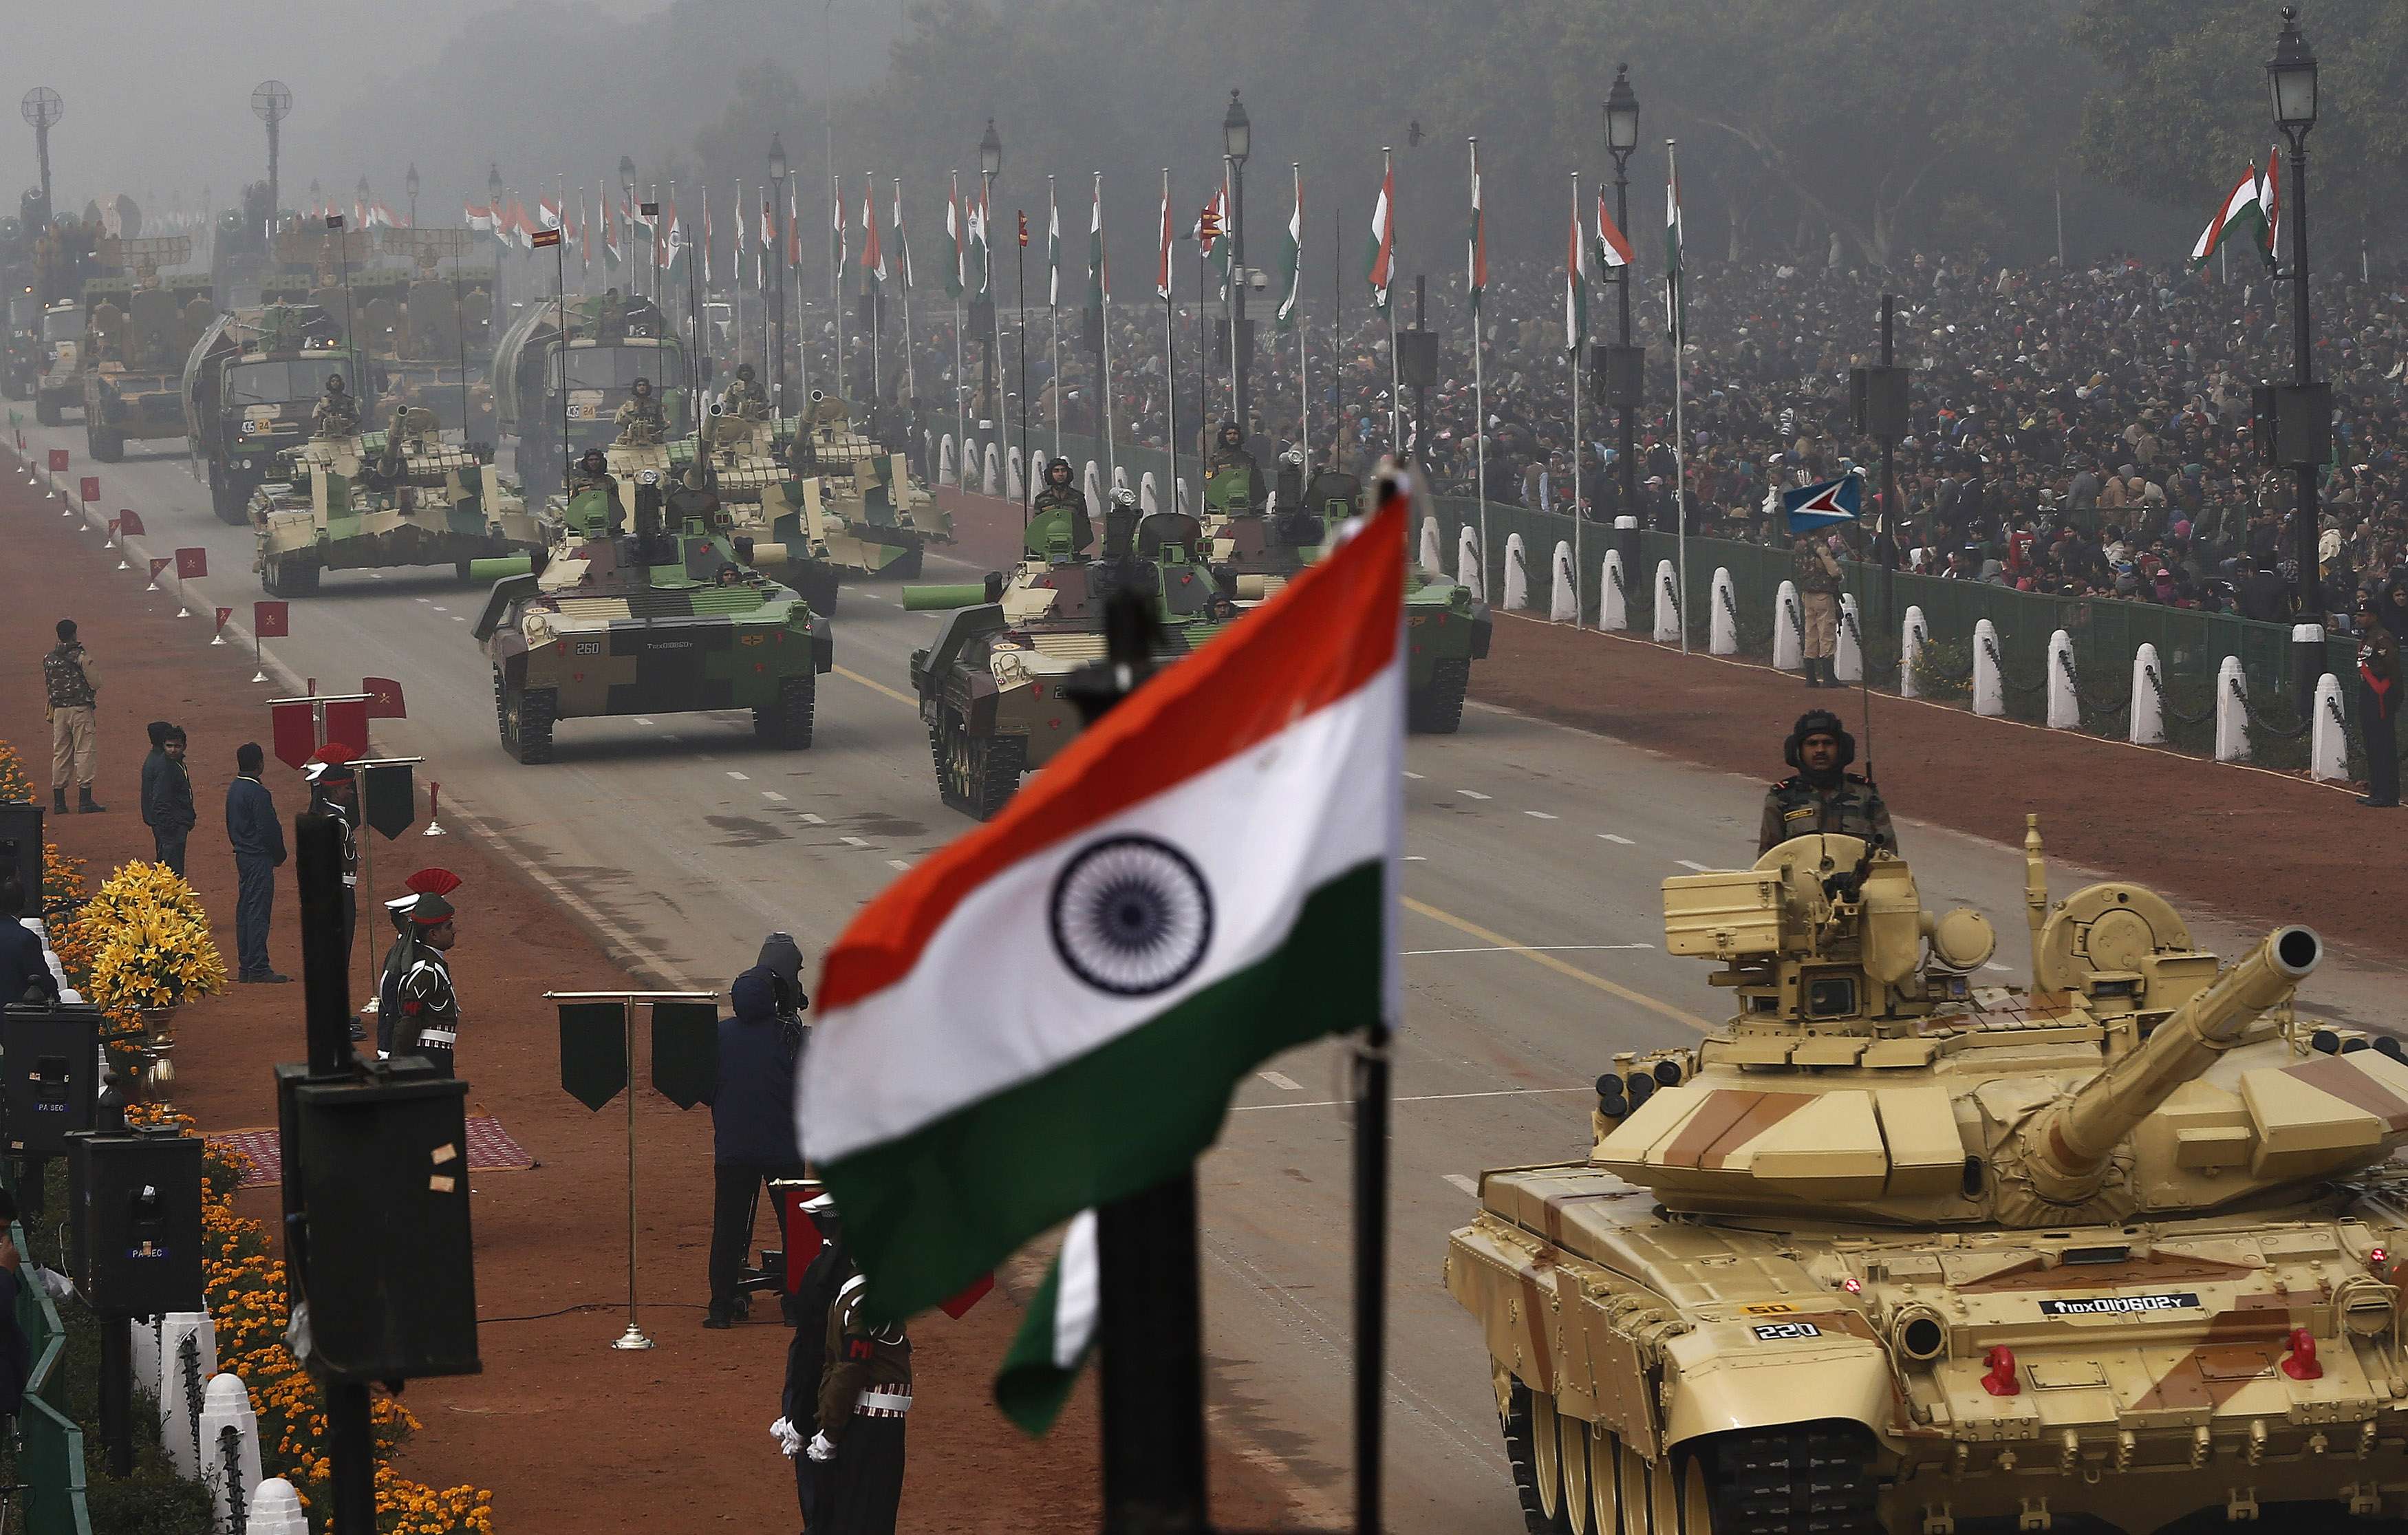 Indian Army's Arjun MK-I tanks (MBTs) are driven for display during the Republic Day parade in New Delhi January 26, 2014. India celebrated its 65th Republic Day on Sunday. REUTERS/Adnan Abidi (INDIA - Tags: MILITARY ANNIVERSARY POLITICS)